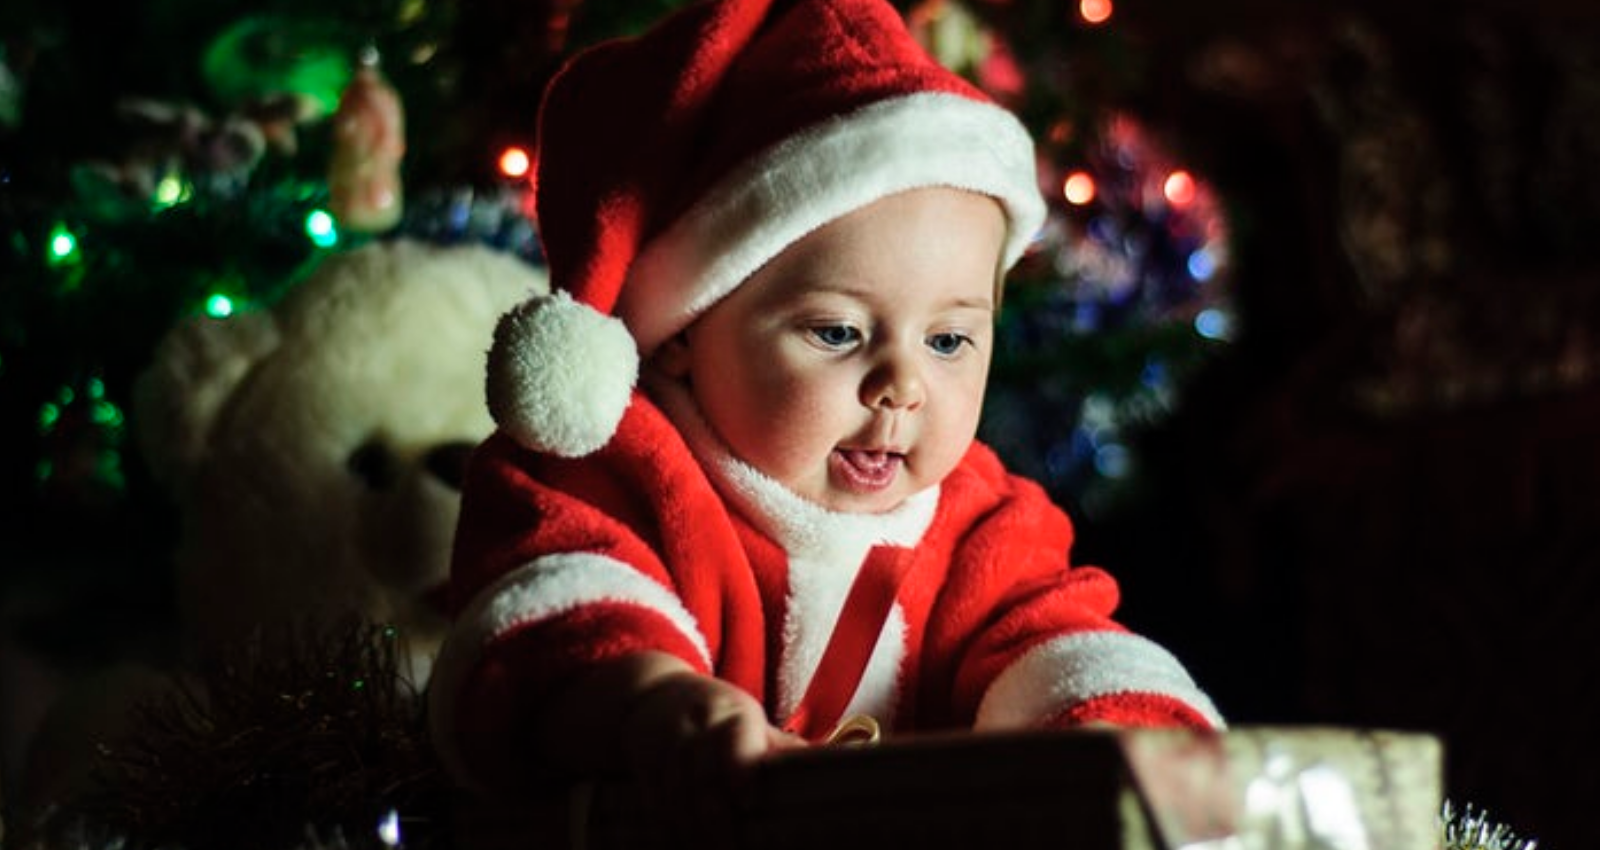 Dealing with sensory overload during festive Christmas period